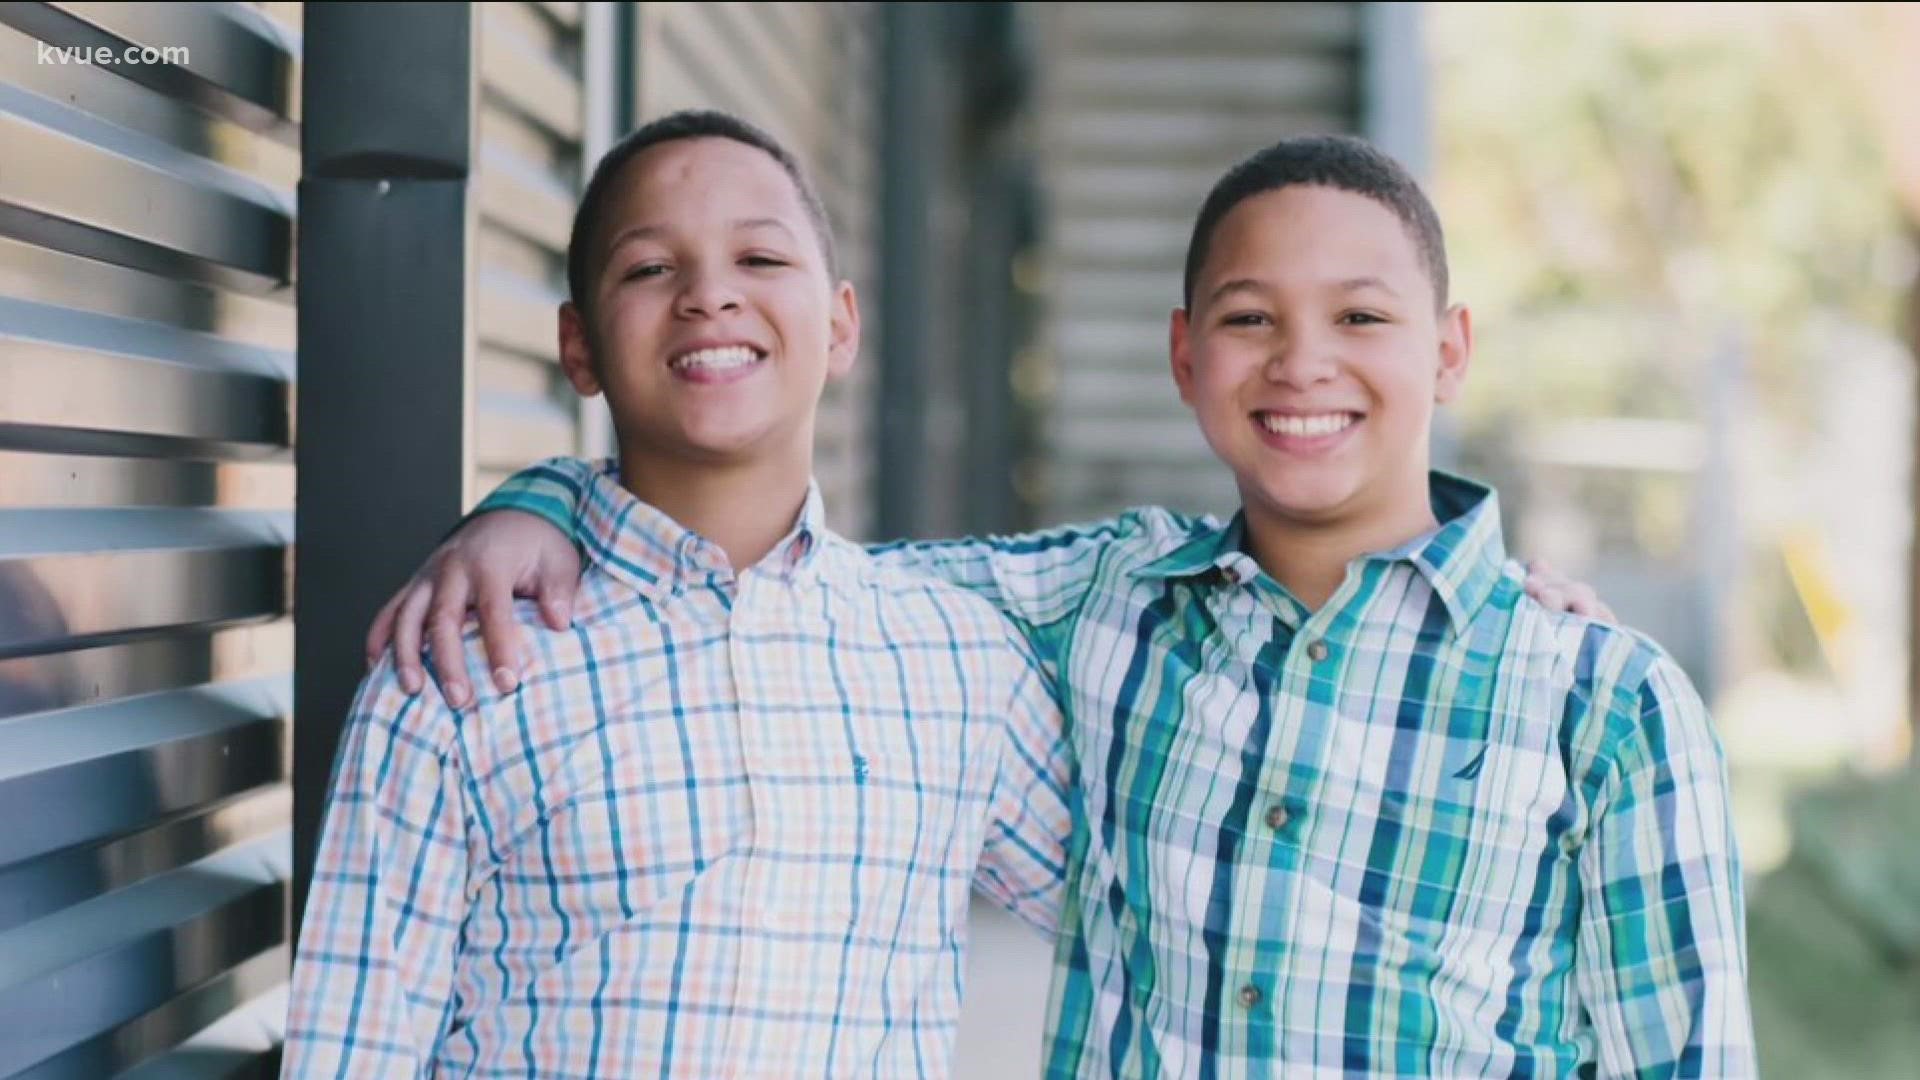 For this week's Forever Families, KVUE's Hannah Rucker introduces you to twin brothers Trey and Tavaris.